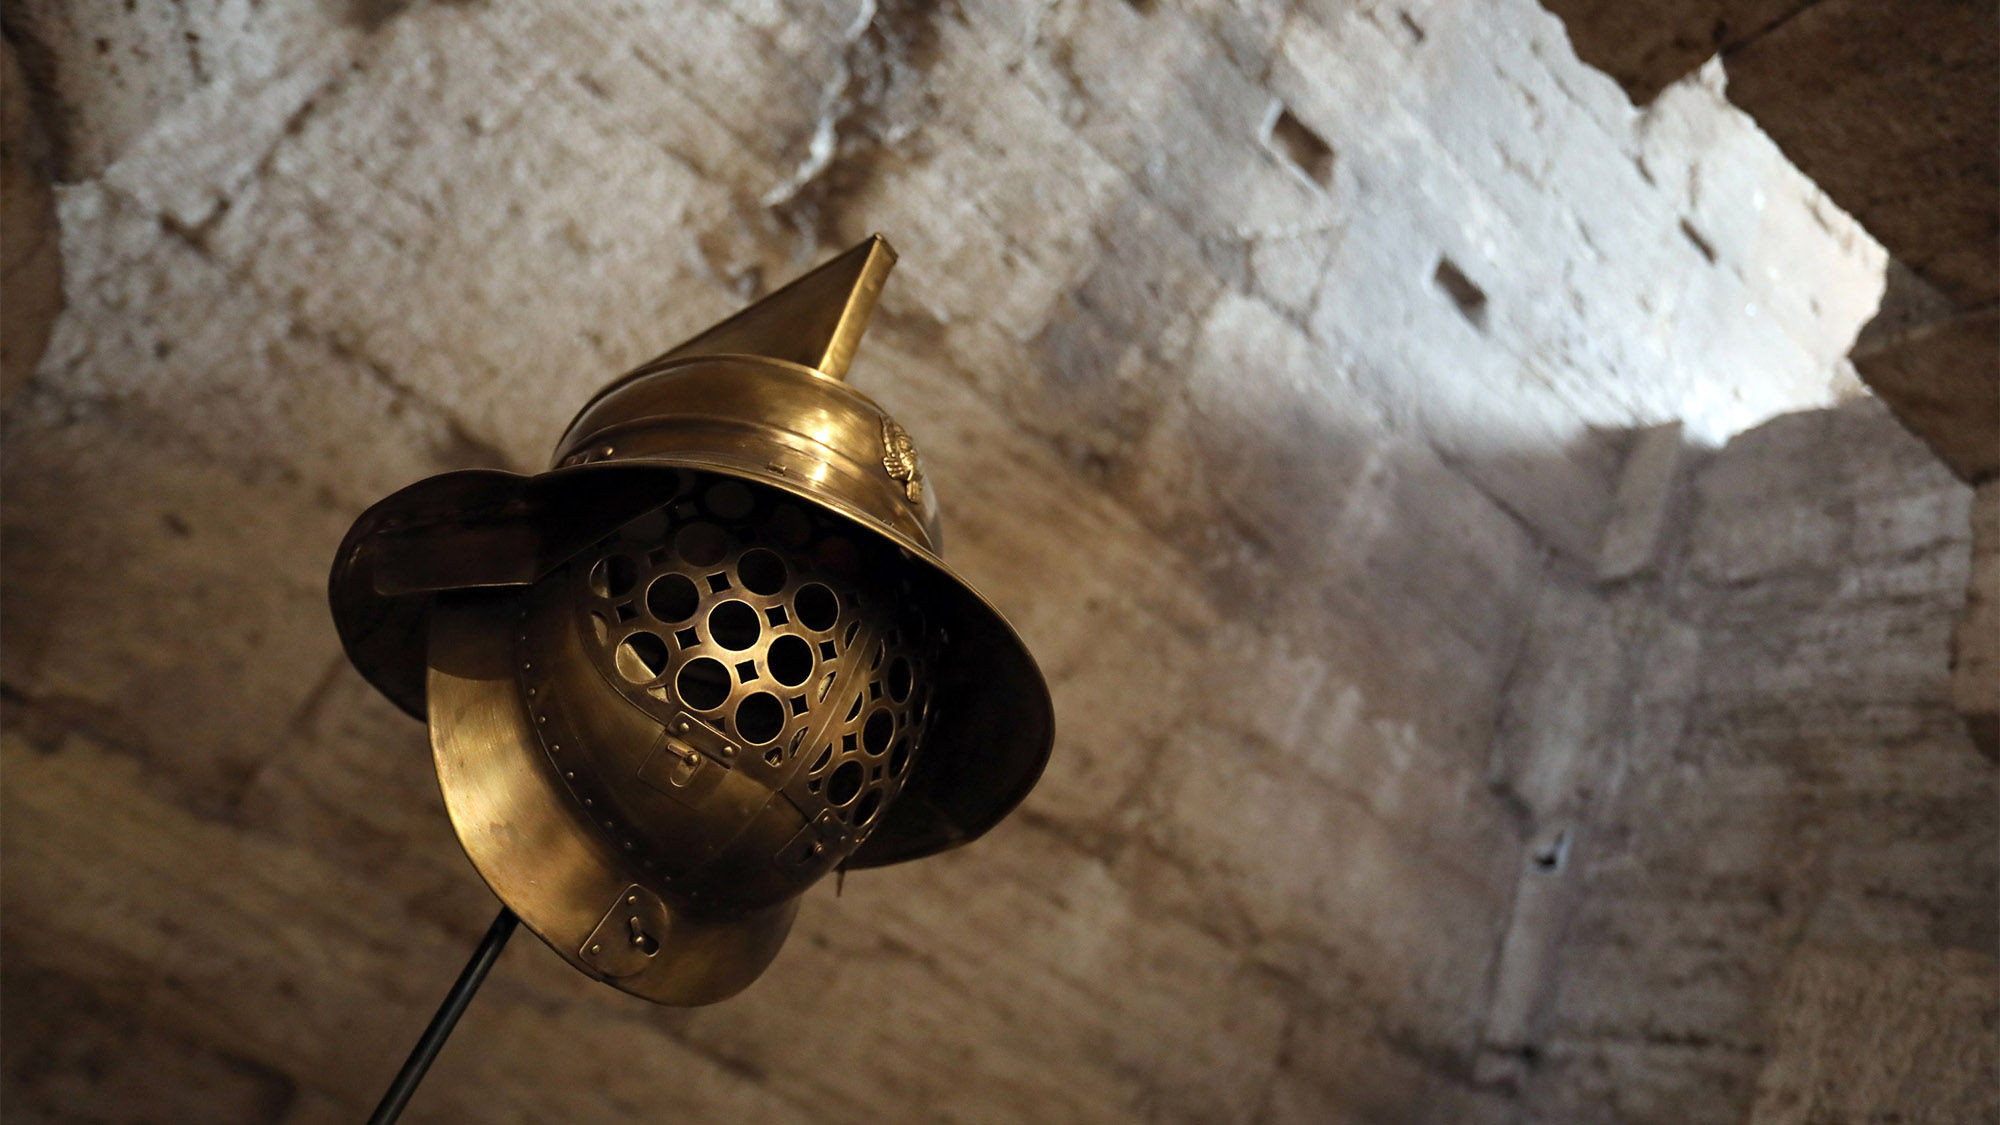 Gladiator's helmet located in the newly renovated Underground Colosseum exhibit in Rome.